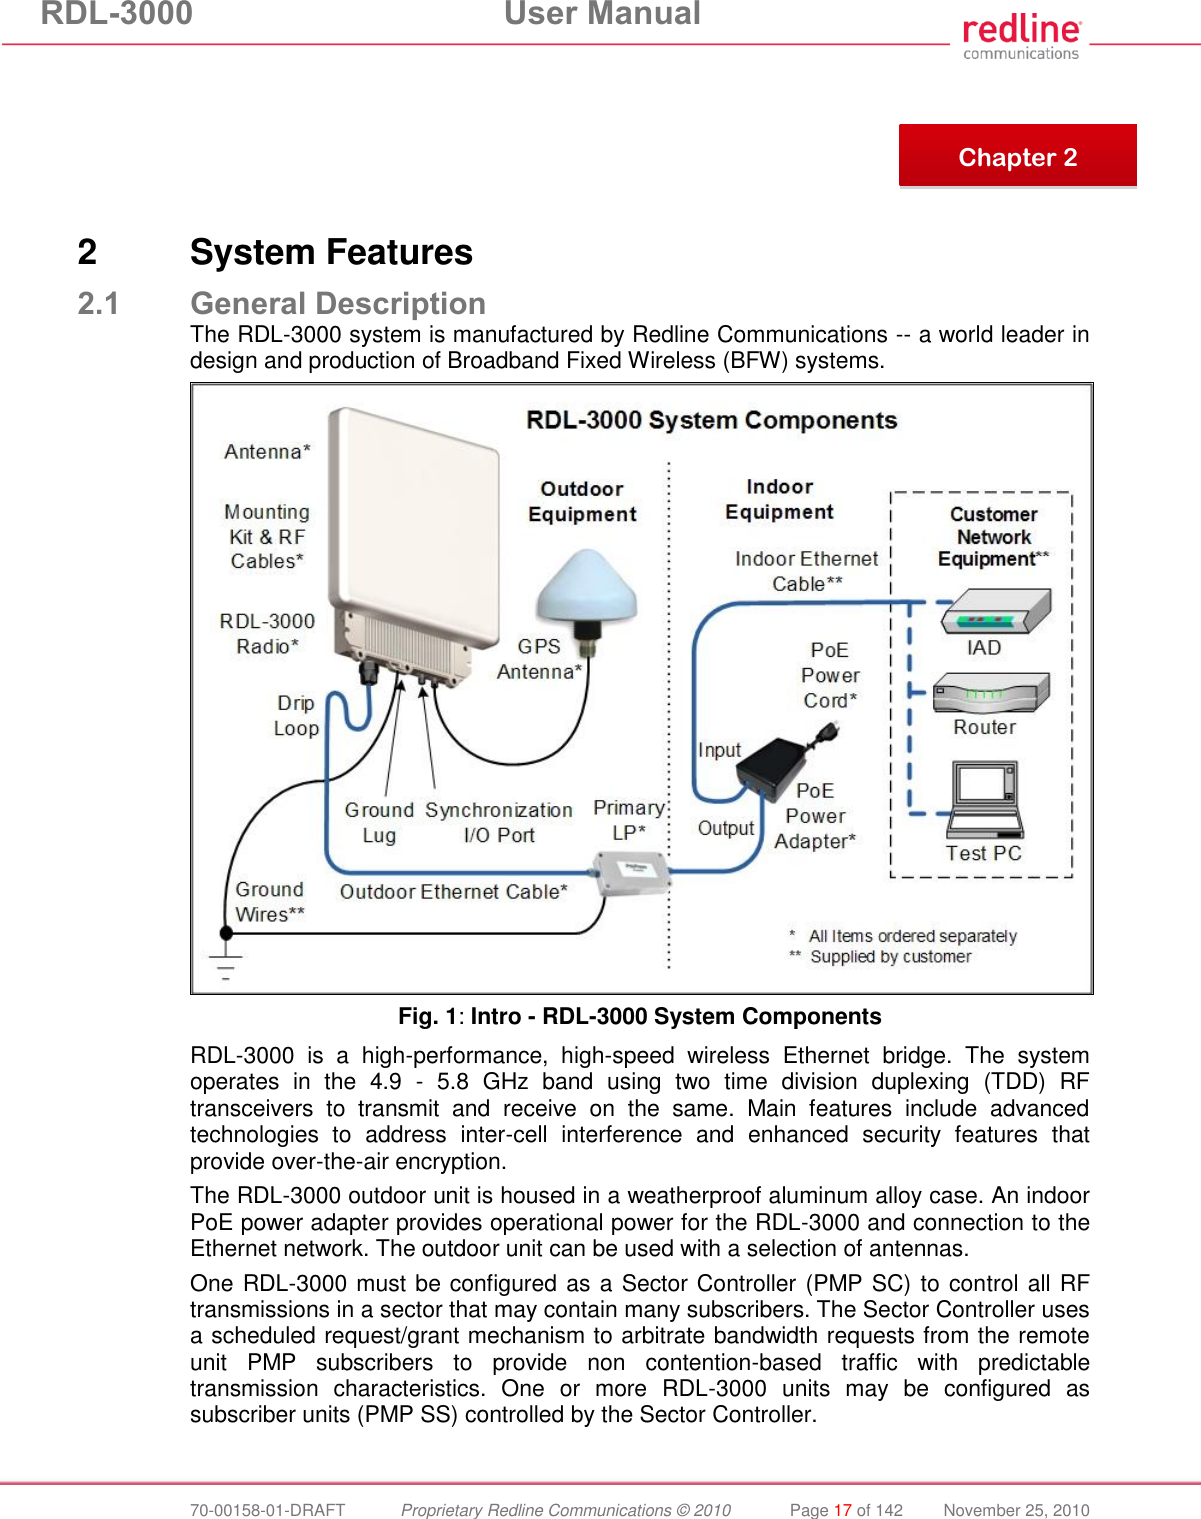 RDL-3000  User Manual  70-00158-01-DRAFT  Proprietary Redline Communications © 2010  Page 17 of 142  November 25, 2010        2  System Features 2.1 General Description The RDL-3000 system is manufactured by Redline Communications -- a world leader in design and production of Broadband Fixed Wireless (BFW) systems.  Fig. 1: Intro - RDL-3000 System Components RDL-3000  is  a  high-performance,  high-speed  wireless  Ethernet  bridge.  The  system operates  in  the  4.9  -  5.8  GHz  band  using  two  time  division  duplexing  (TDD)  RF transceivers  to  transmit  and  receive  on  the  same.  Main  features  include  advanced technologies  to  address  inter-cell  interference  and  enhanced  security  features  that provide over-the-air encryption.  The RDL-3000 outdoor unit is housed in a weatherproof aluminum alloy case. An indoor PoE power adapter provides operational power for the RDL-3000 and connection to the Ethernet network. The outdoor unit can be used with a selection of antennas. One RDL-3000 must be configured as a Sector Controller (PMP SC) to control all RF transmissions in a sector that may contain many subscribers. The Sector Controller uses a scheduled request/grant mechanism to arbitrate bandwidth requests from the remote unit  PMP  subscribers  to  provide  non  contention-based  traffic  with  predictable transmission  characteristics.  One  or  more  RDL-3000  units  may  be  configured  as subscriber units (PMP SS) controlled by the Sector Controller.   Chapter 2 